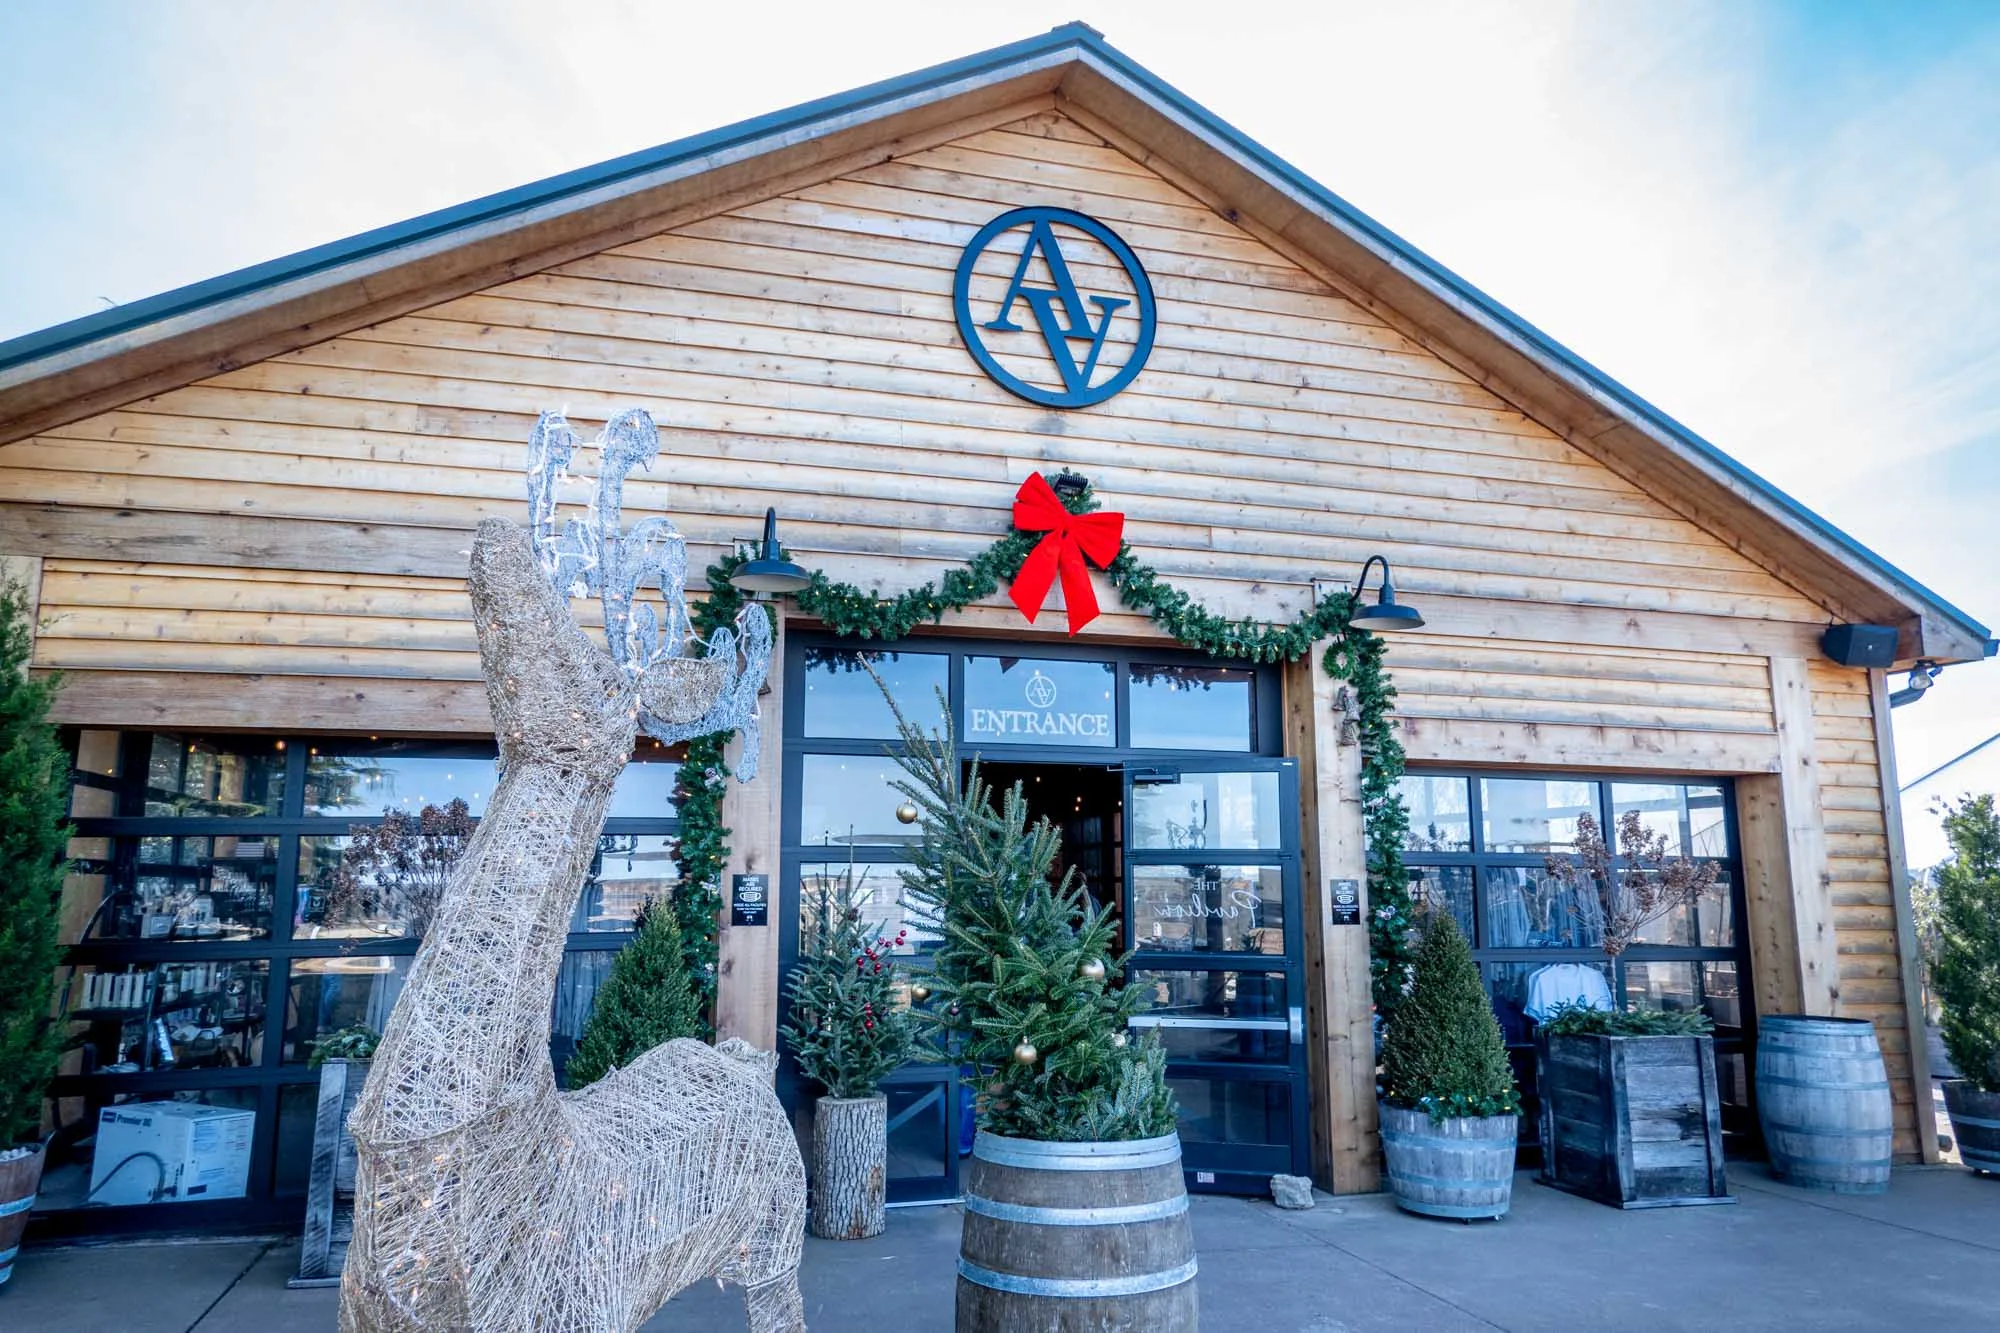 Reindeer decorations and holiday garland outside a winery tasting room.